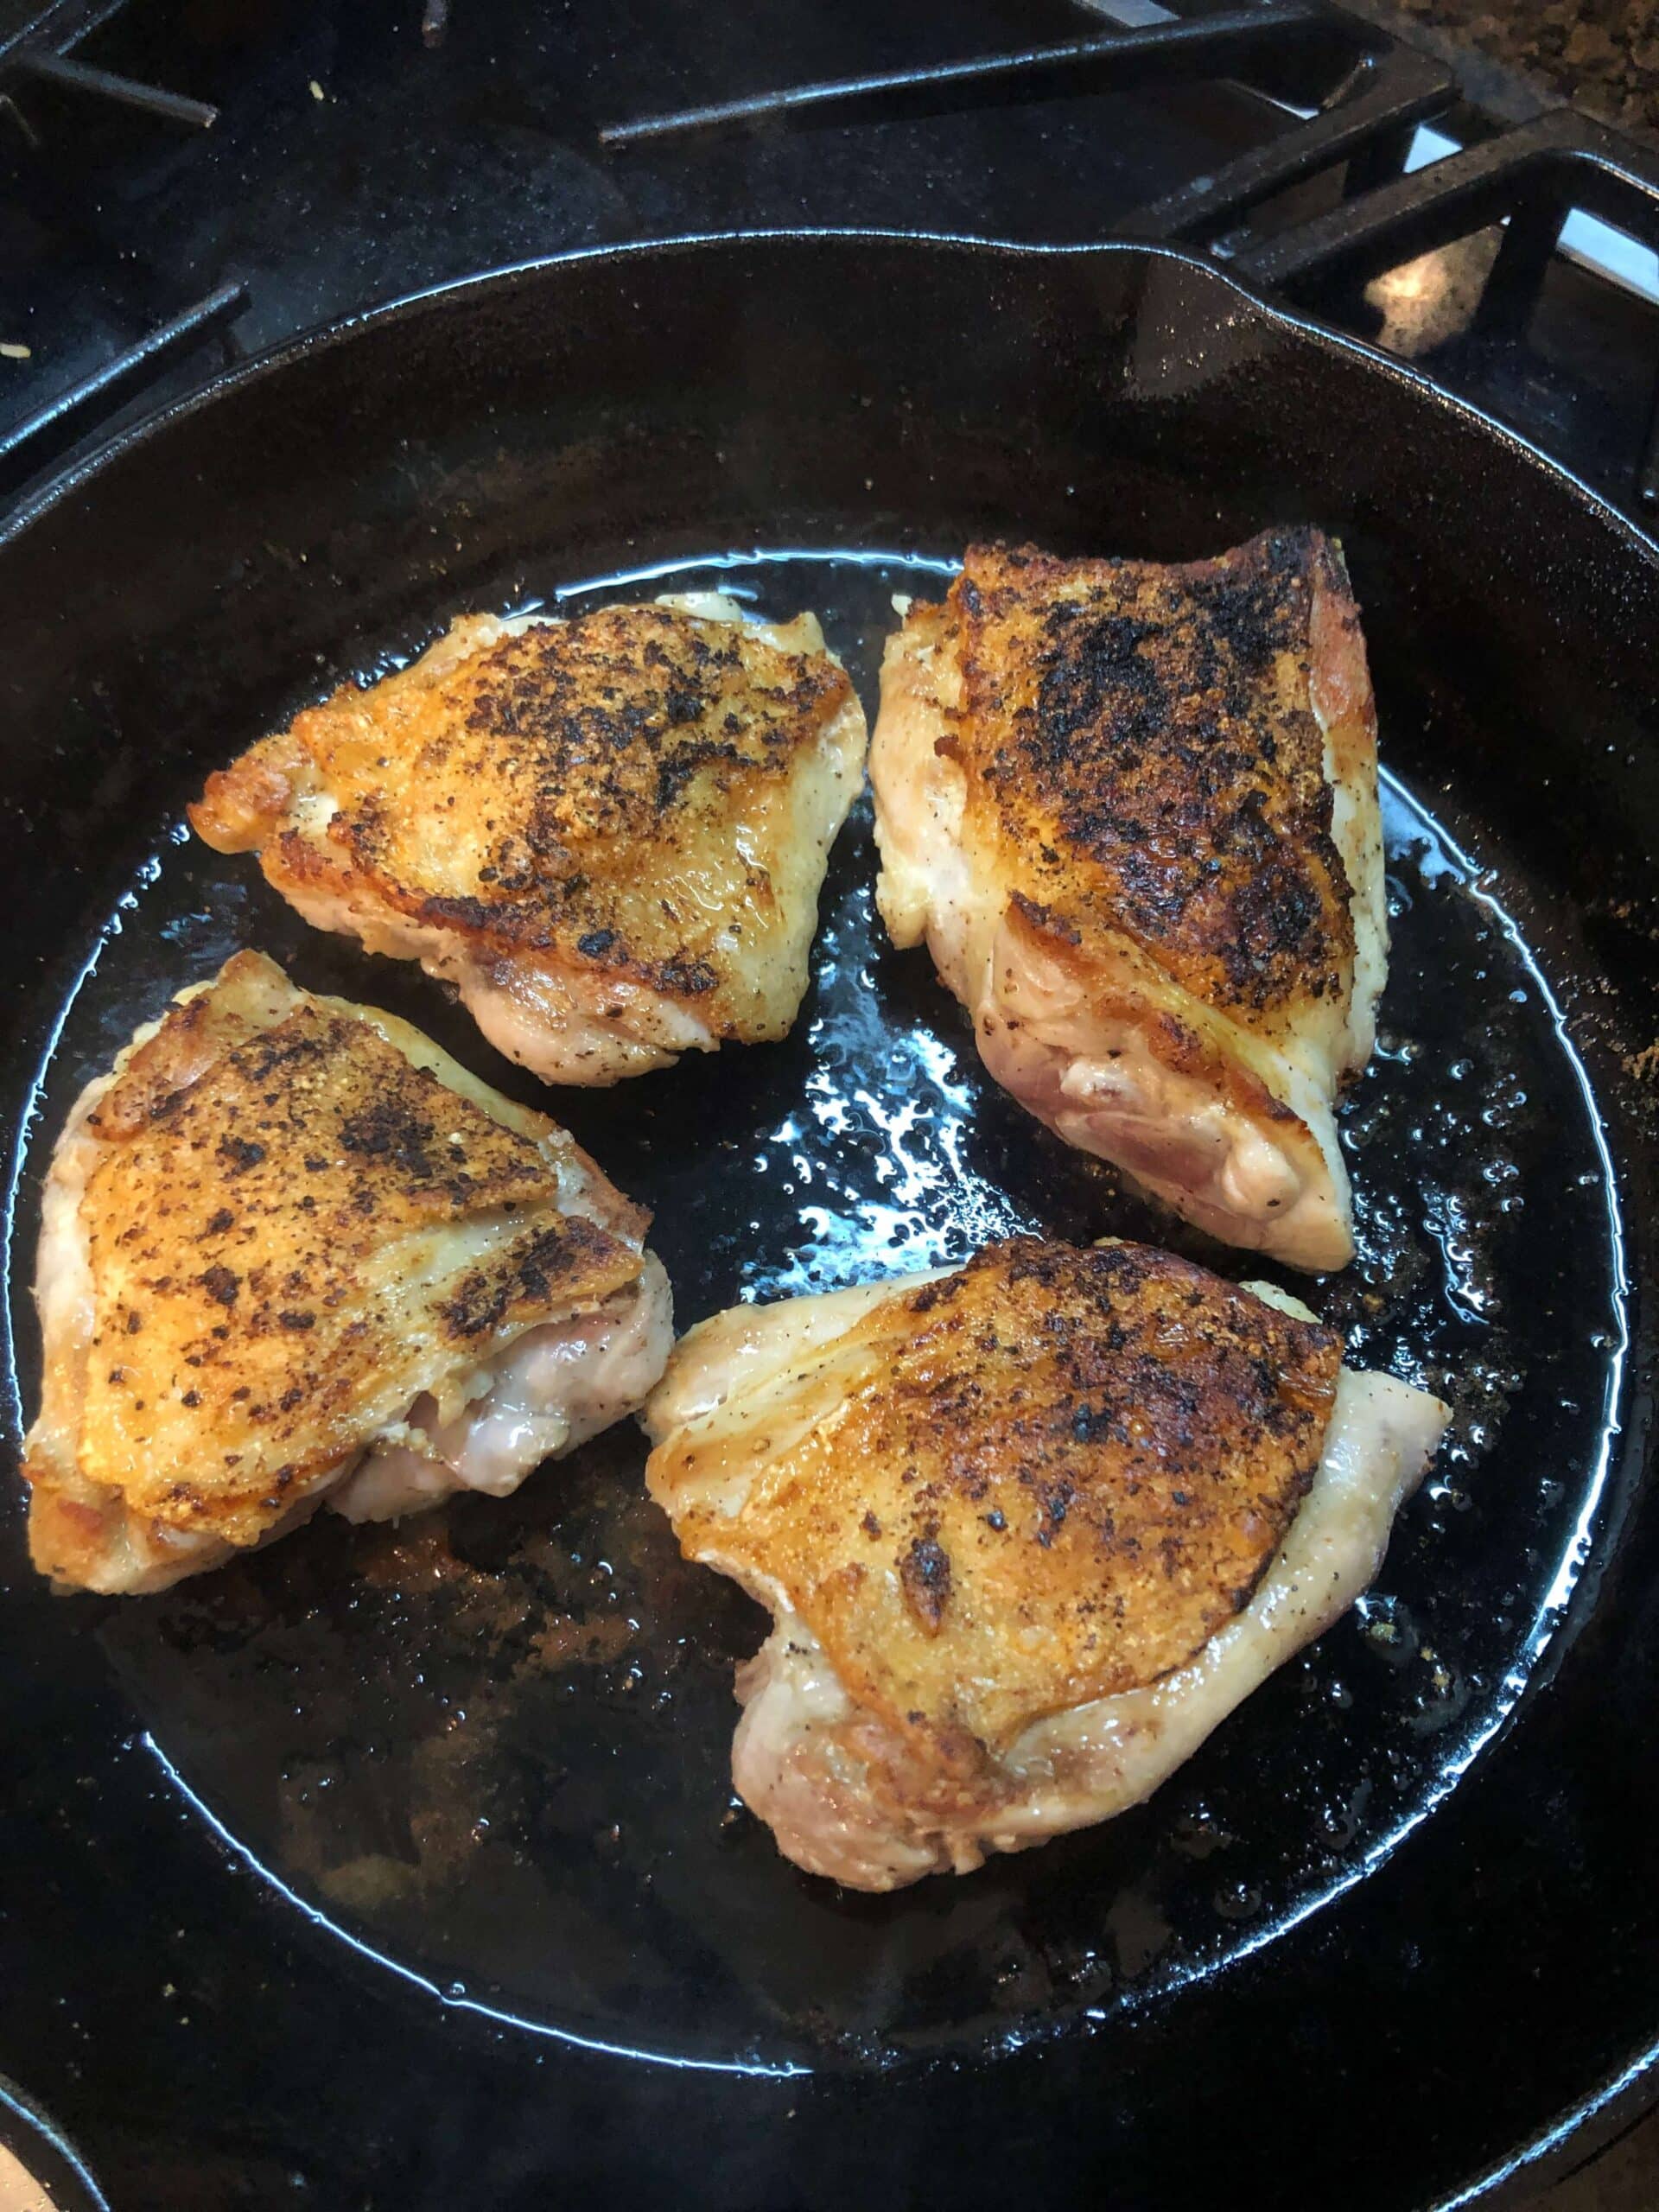 Chicken thighs cooking in cast iron skillet